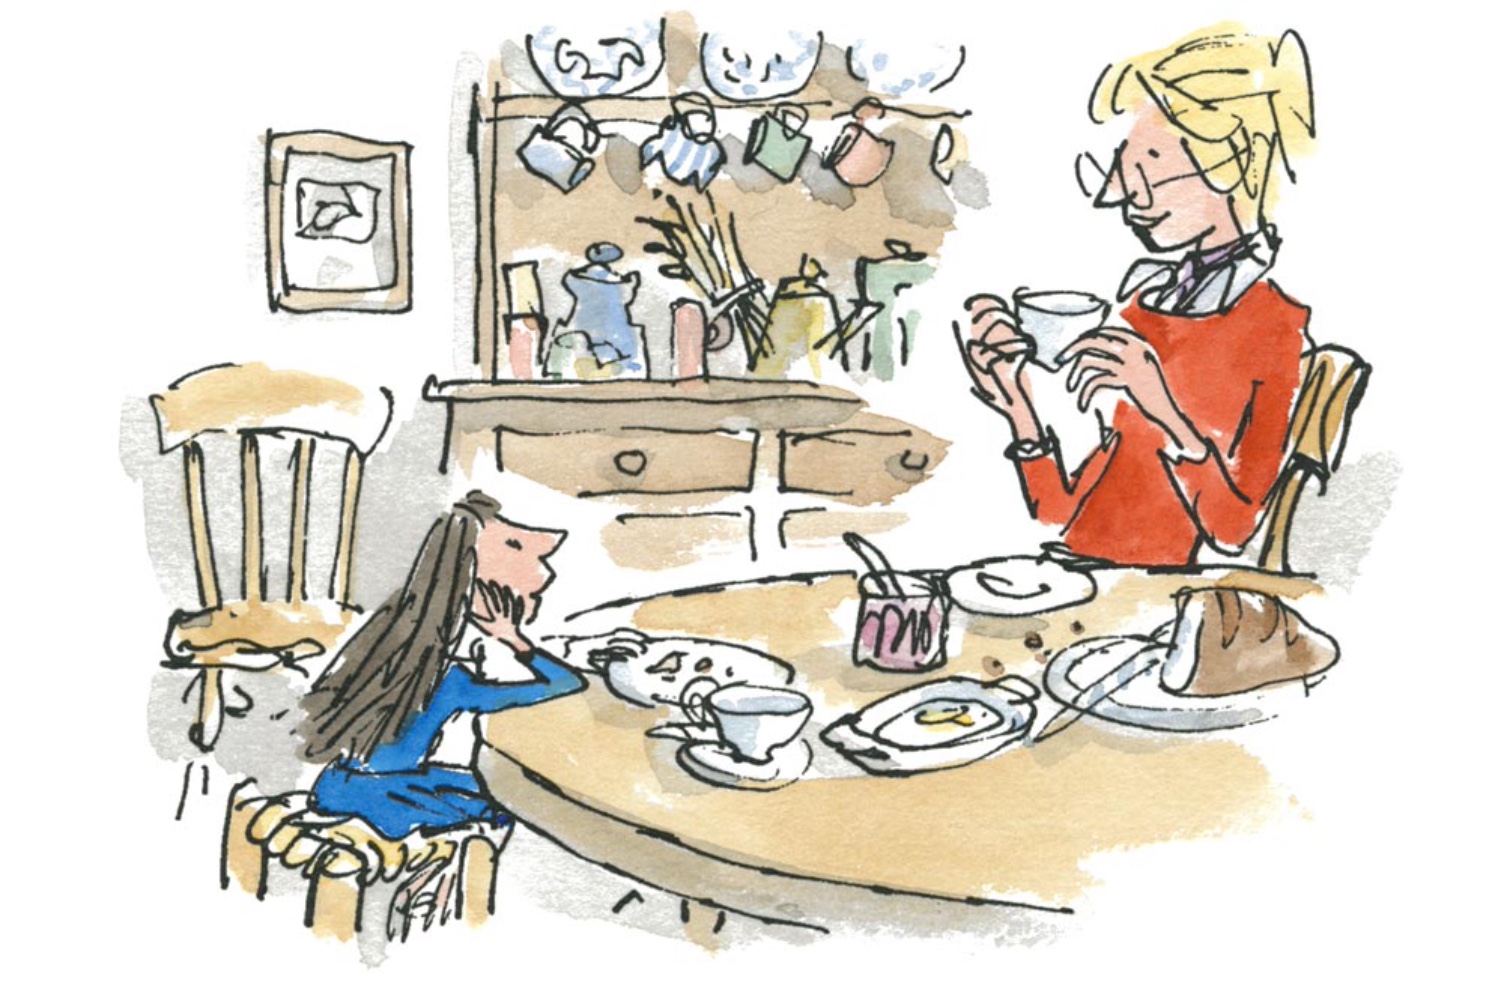 An illustration of Matilda and Miss Honey bonding over their shared love of literature in Miss Honey's cozy cottage.